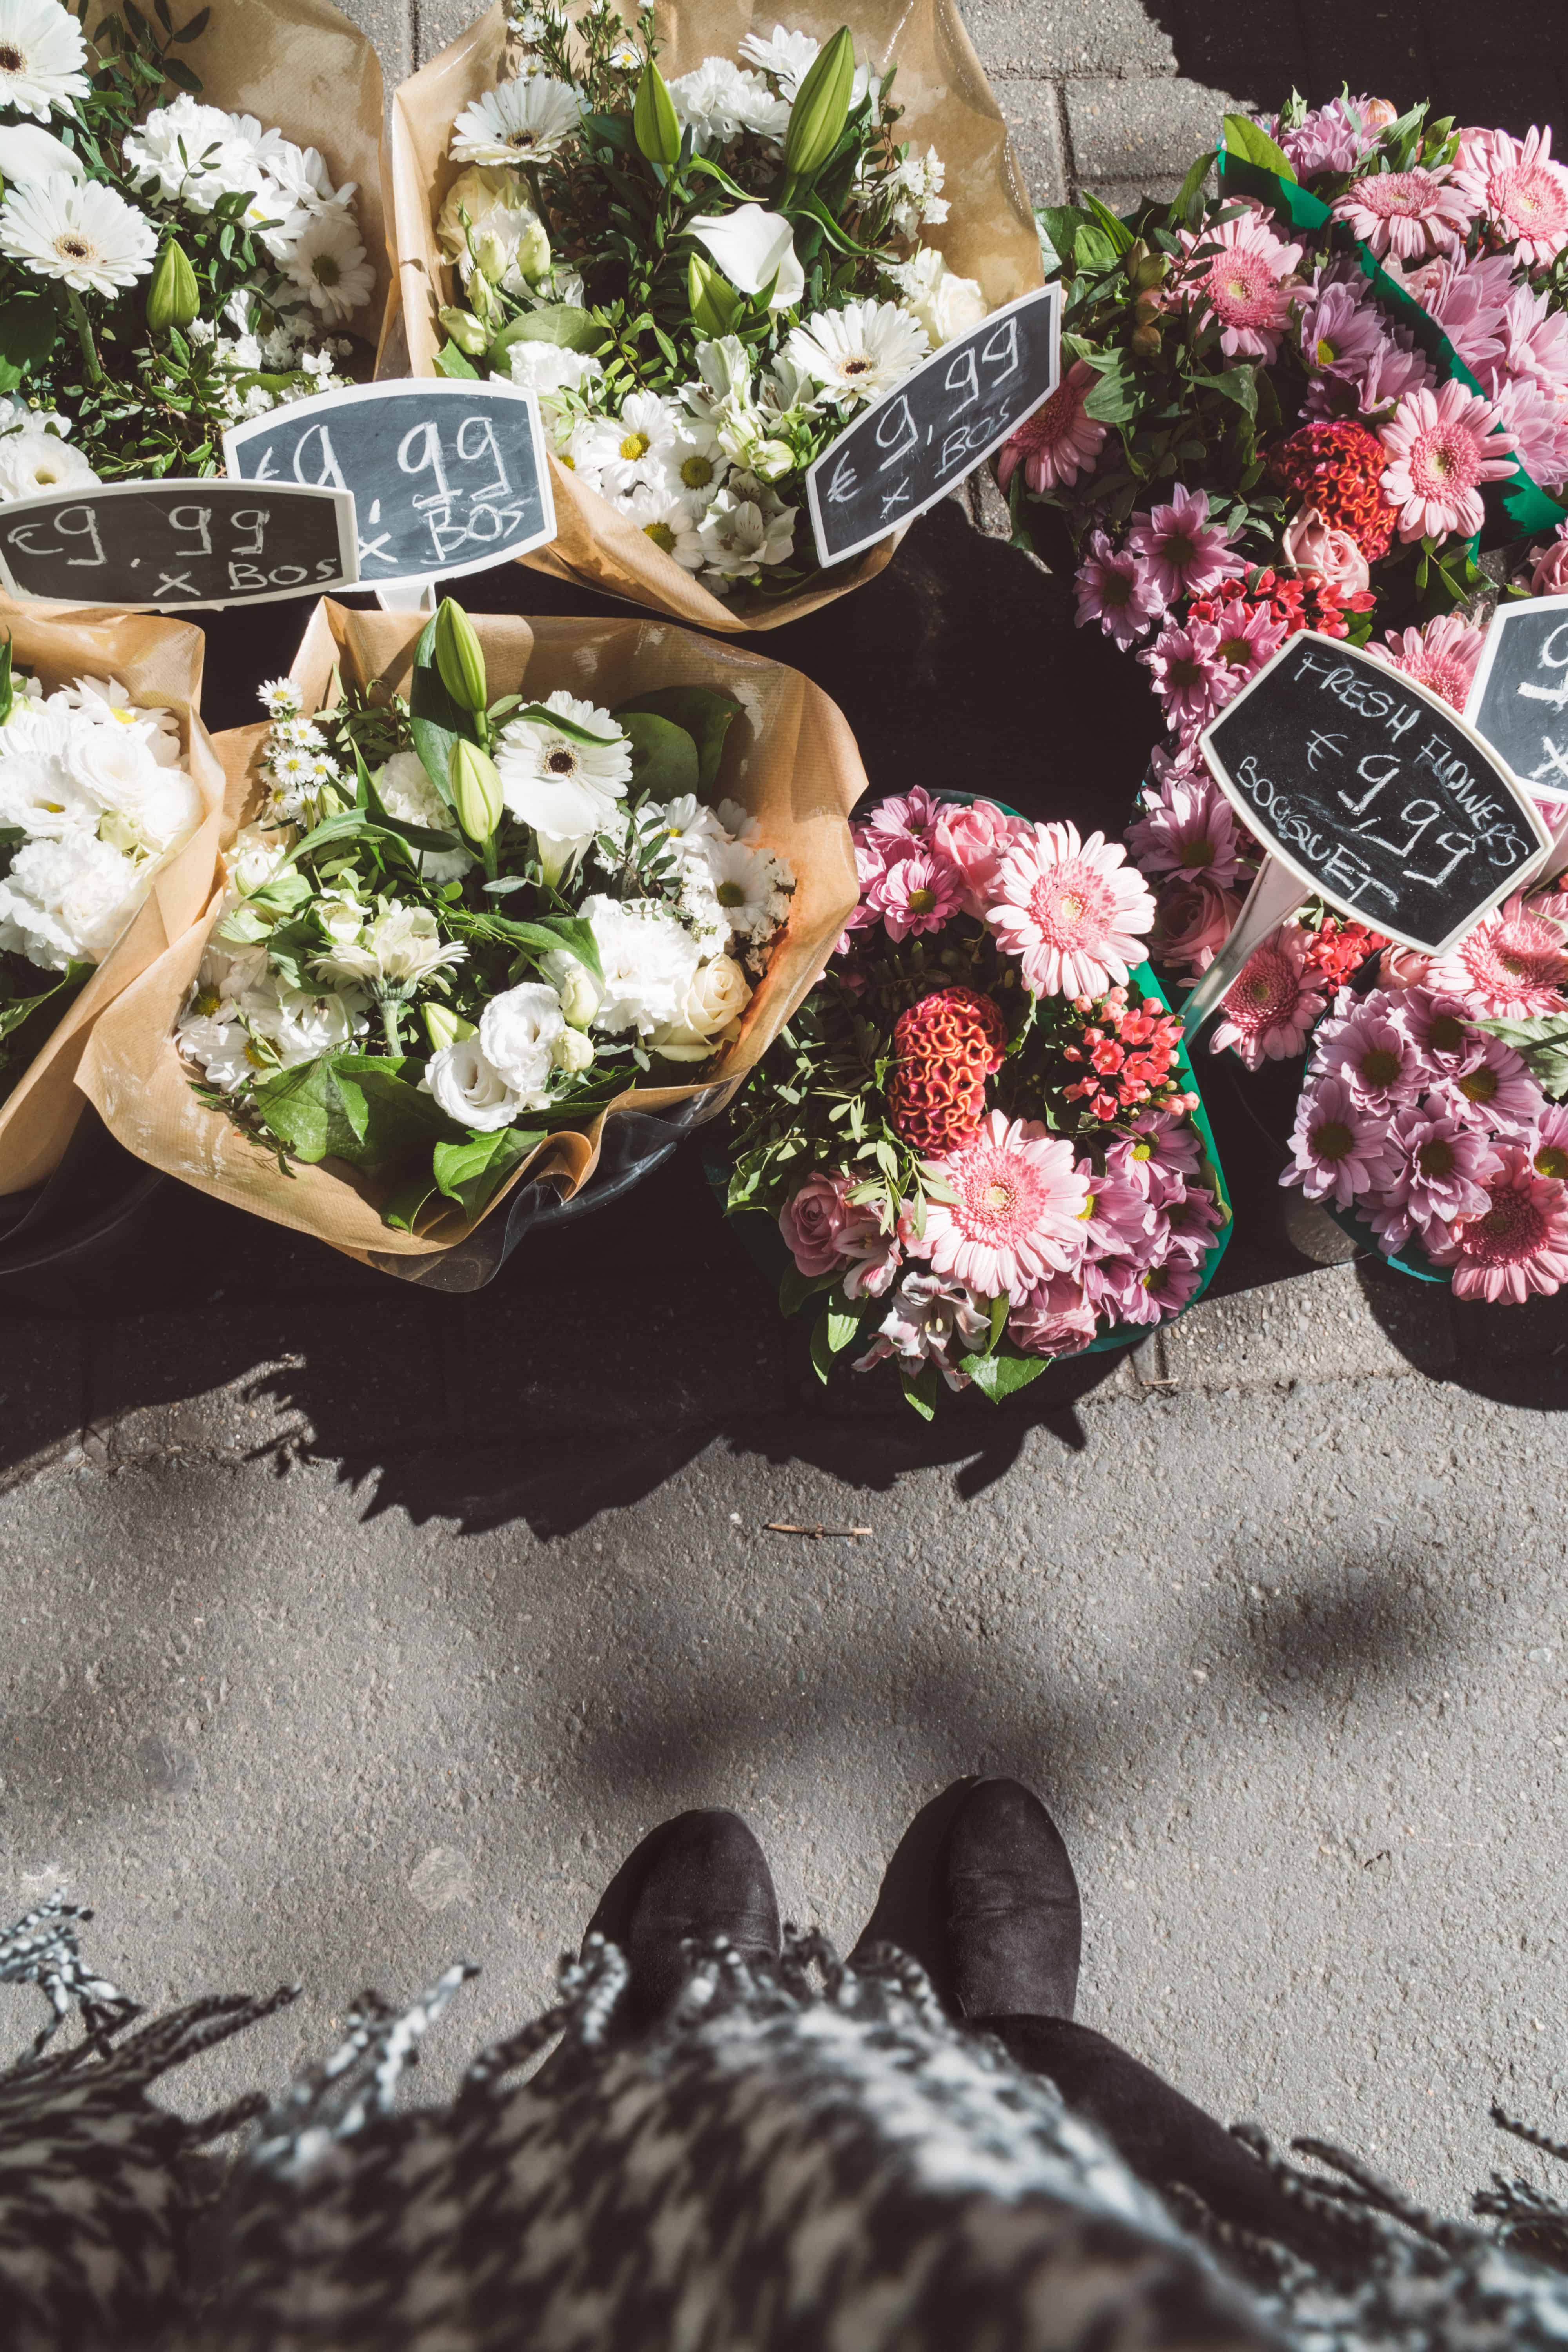 Flower market | THE ULTIMATE GUIDE TO AMSTERDAM NETHERLANDS | The Republic Of Rose